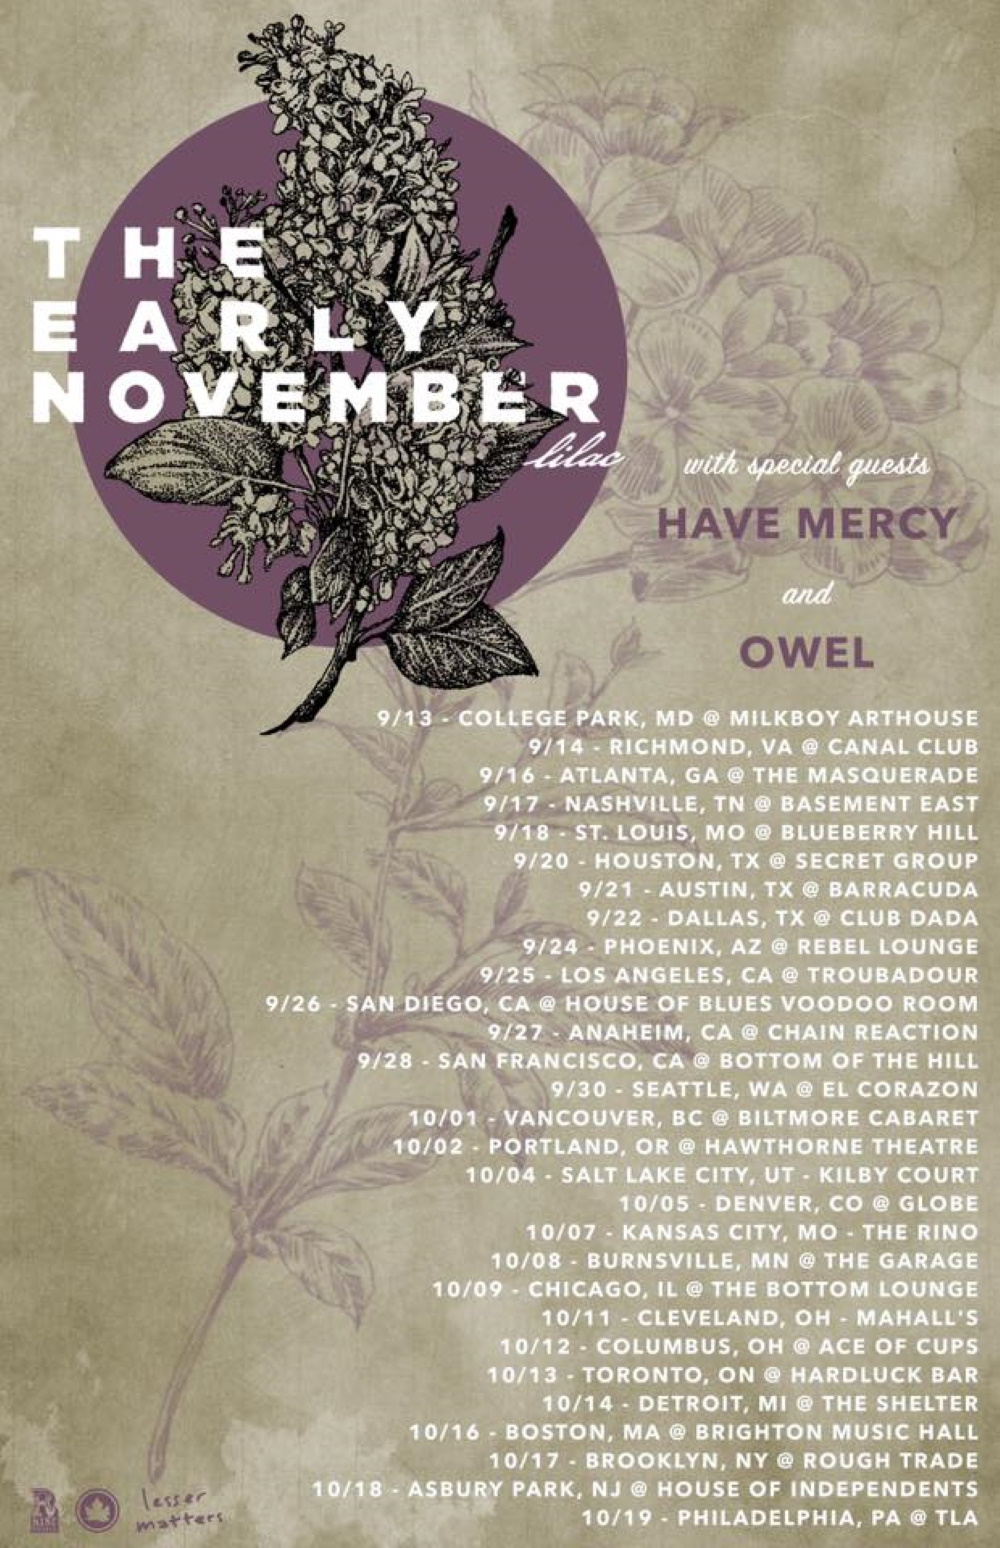 THE EARLY NOVEMBER on tour